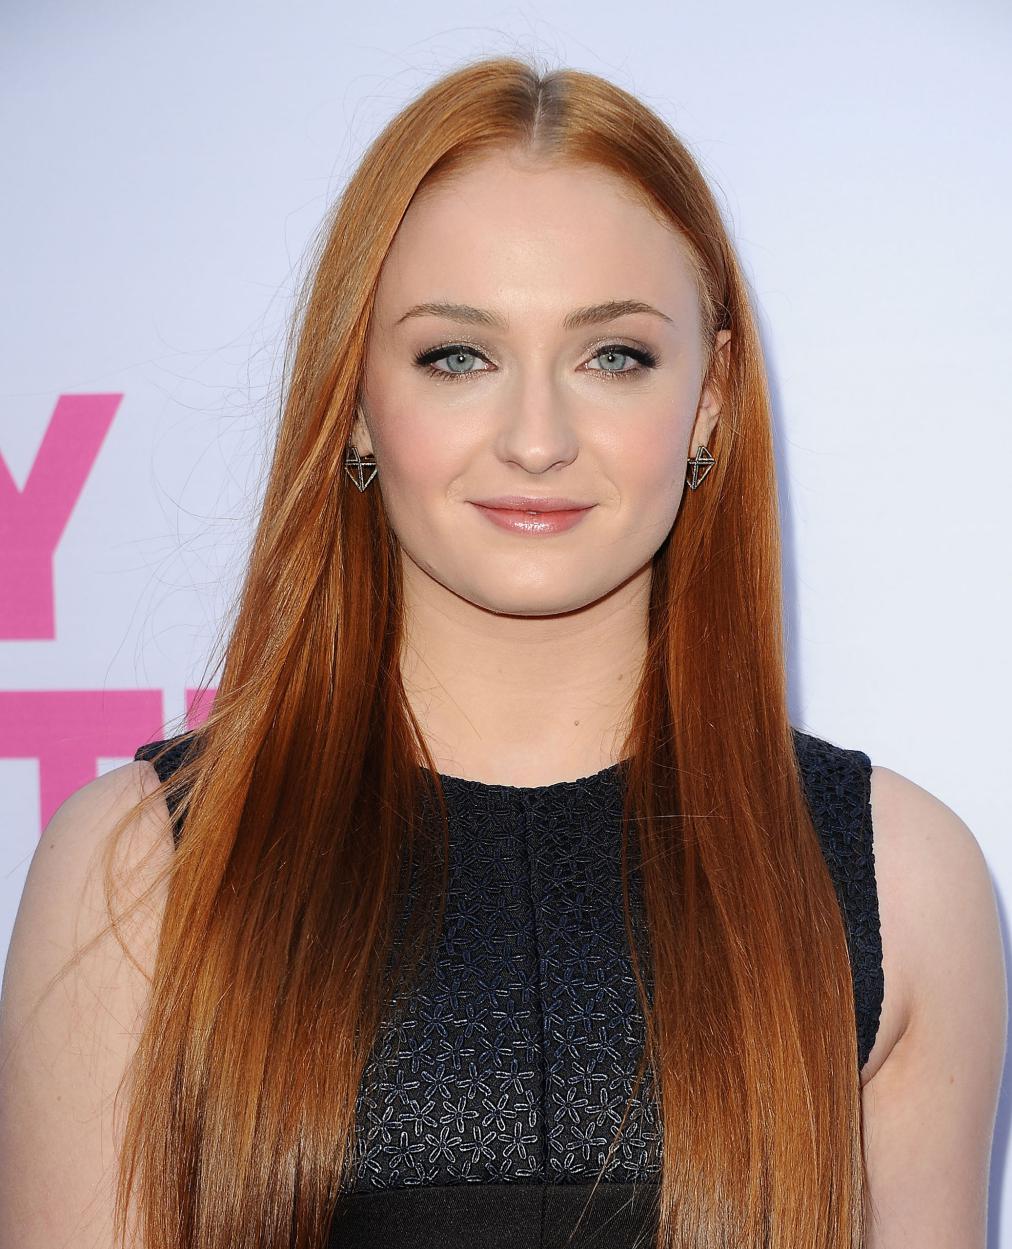 HOLLYWOOD, CA - MAY 27: Actress Sophie Turner attends the premiere of "Barely Lethal" at ArcLight Hollywood on May 27, 2015 in Hollywood, California. (Photo by Jason LaVeris/FilmMagic)